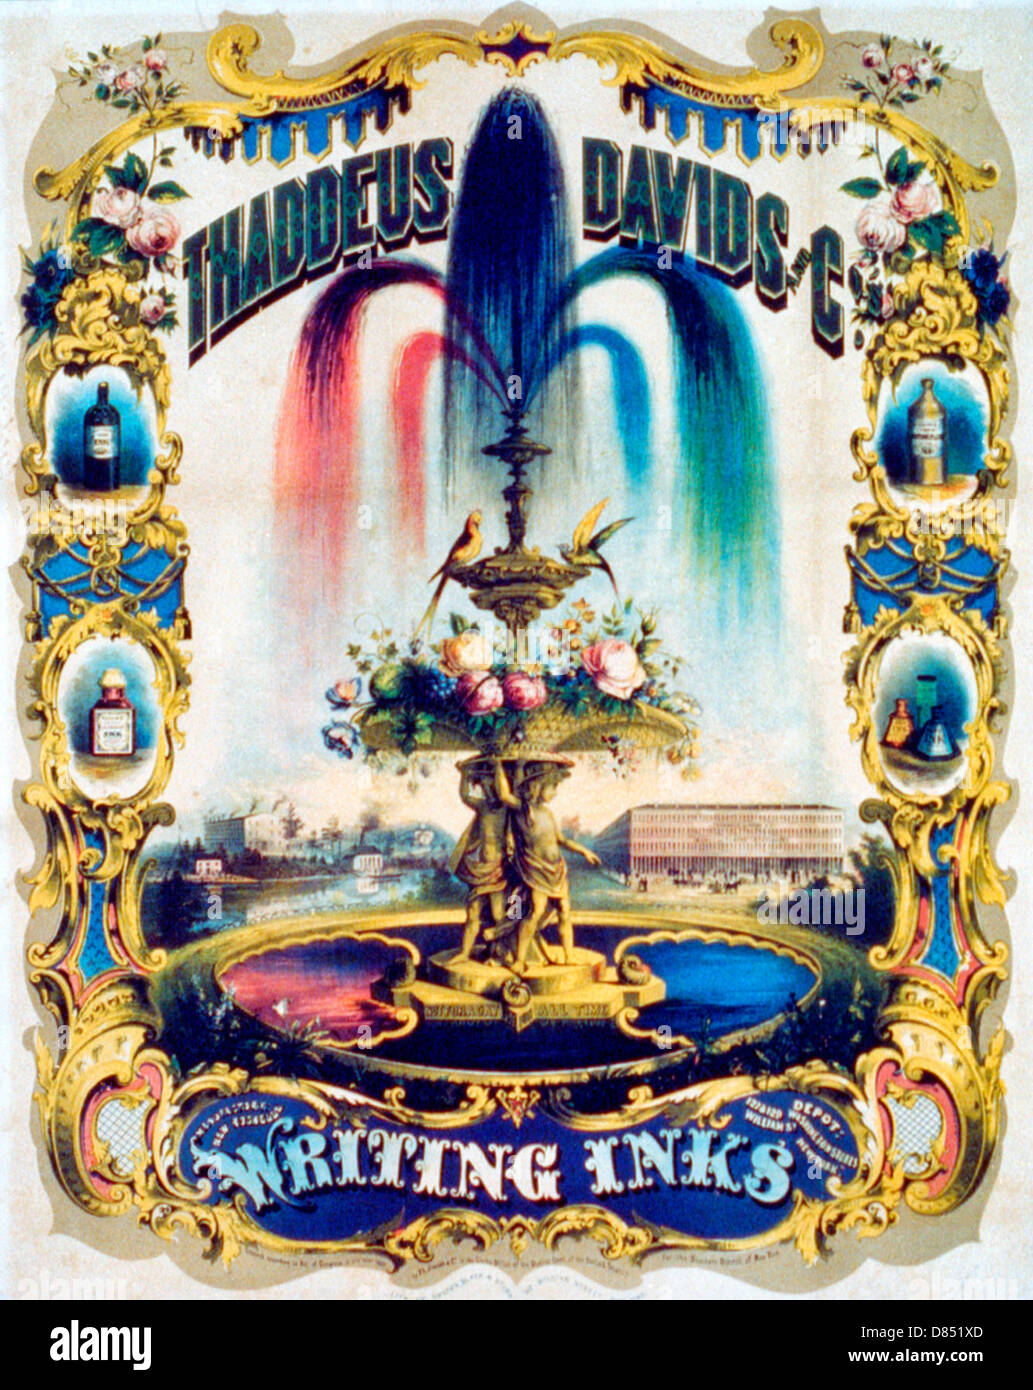 Thaddeus Davids and Company writing inks - a large fountain labeled 'Not for a day but for all time' spewing a variety of colored inks; with examples of ink products in an ornamented border, also shows a factory on a river and a large building labeled 'Thaddeus Davids & Co. Manufacturing Stationers'. 1857 ink advertisement Stock Photo